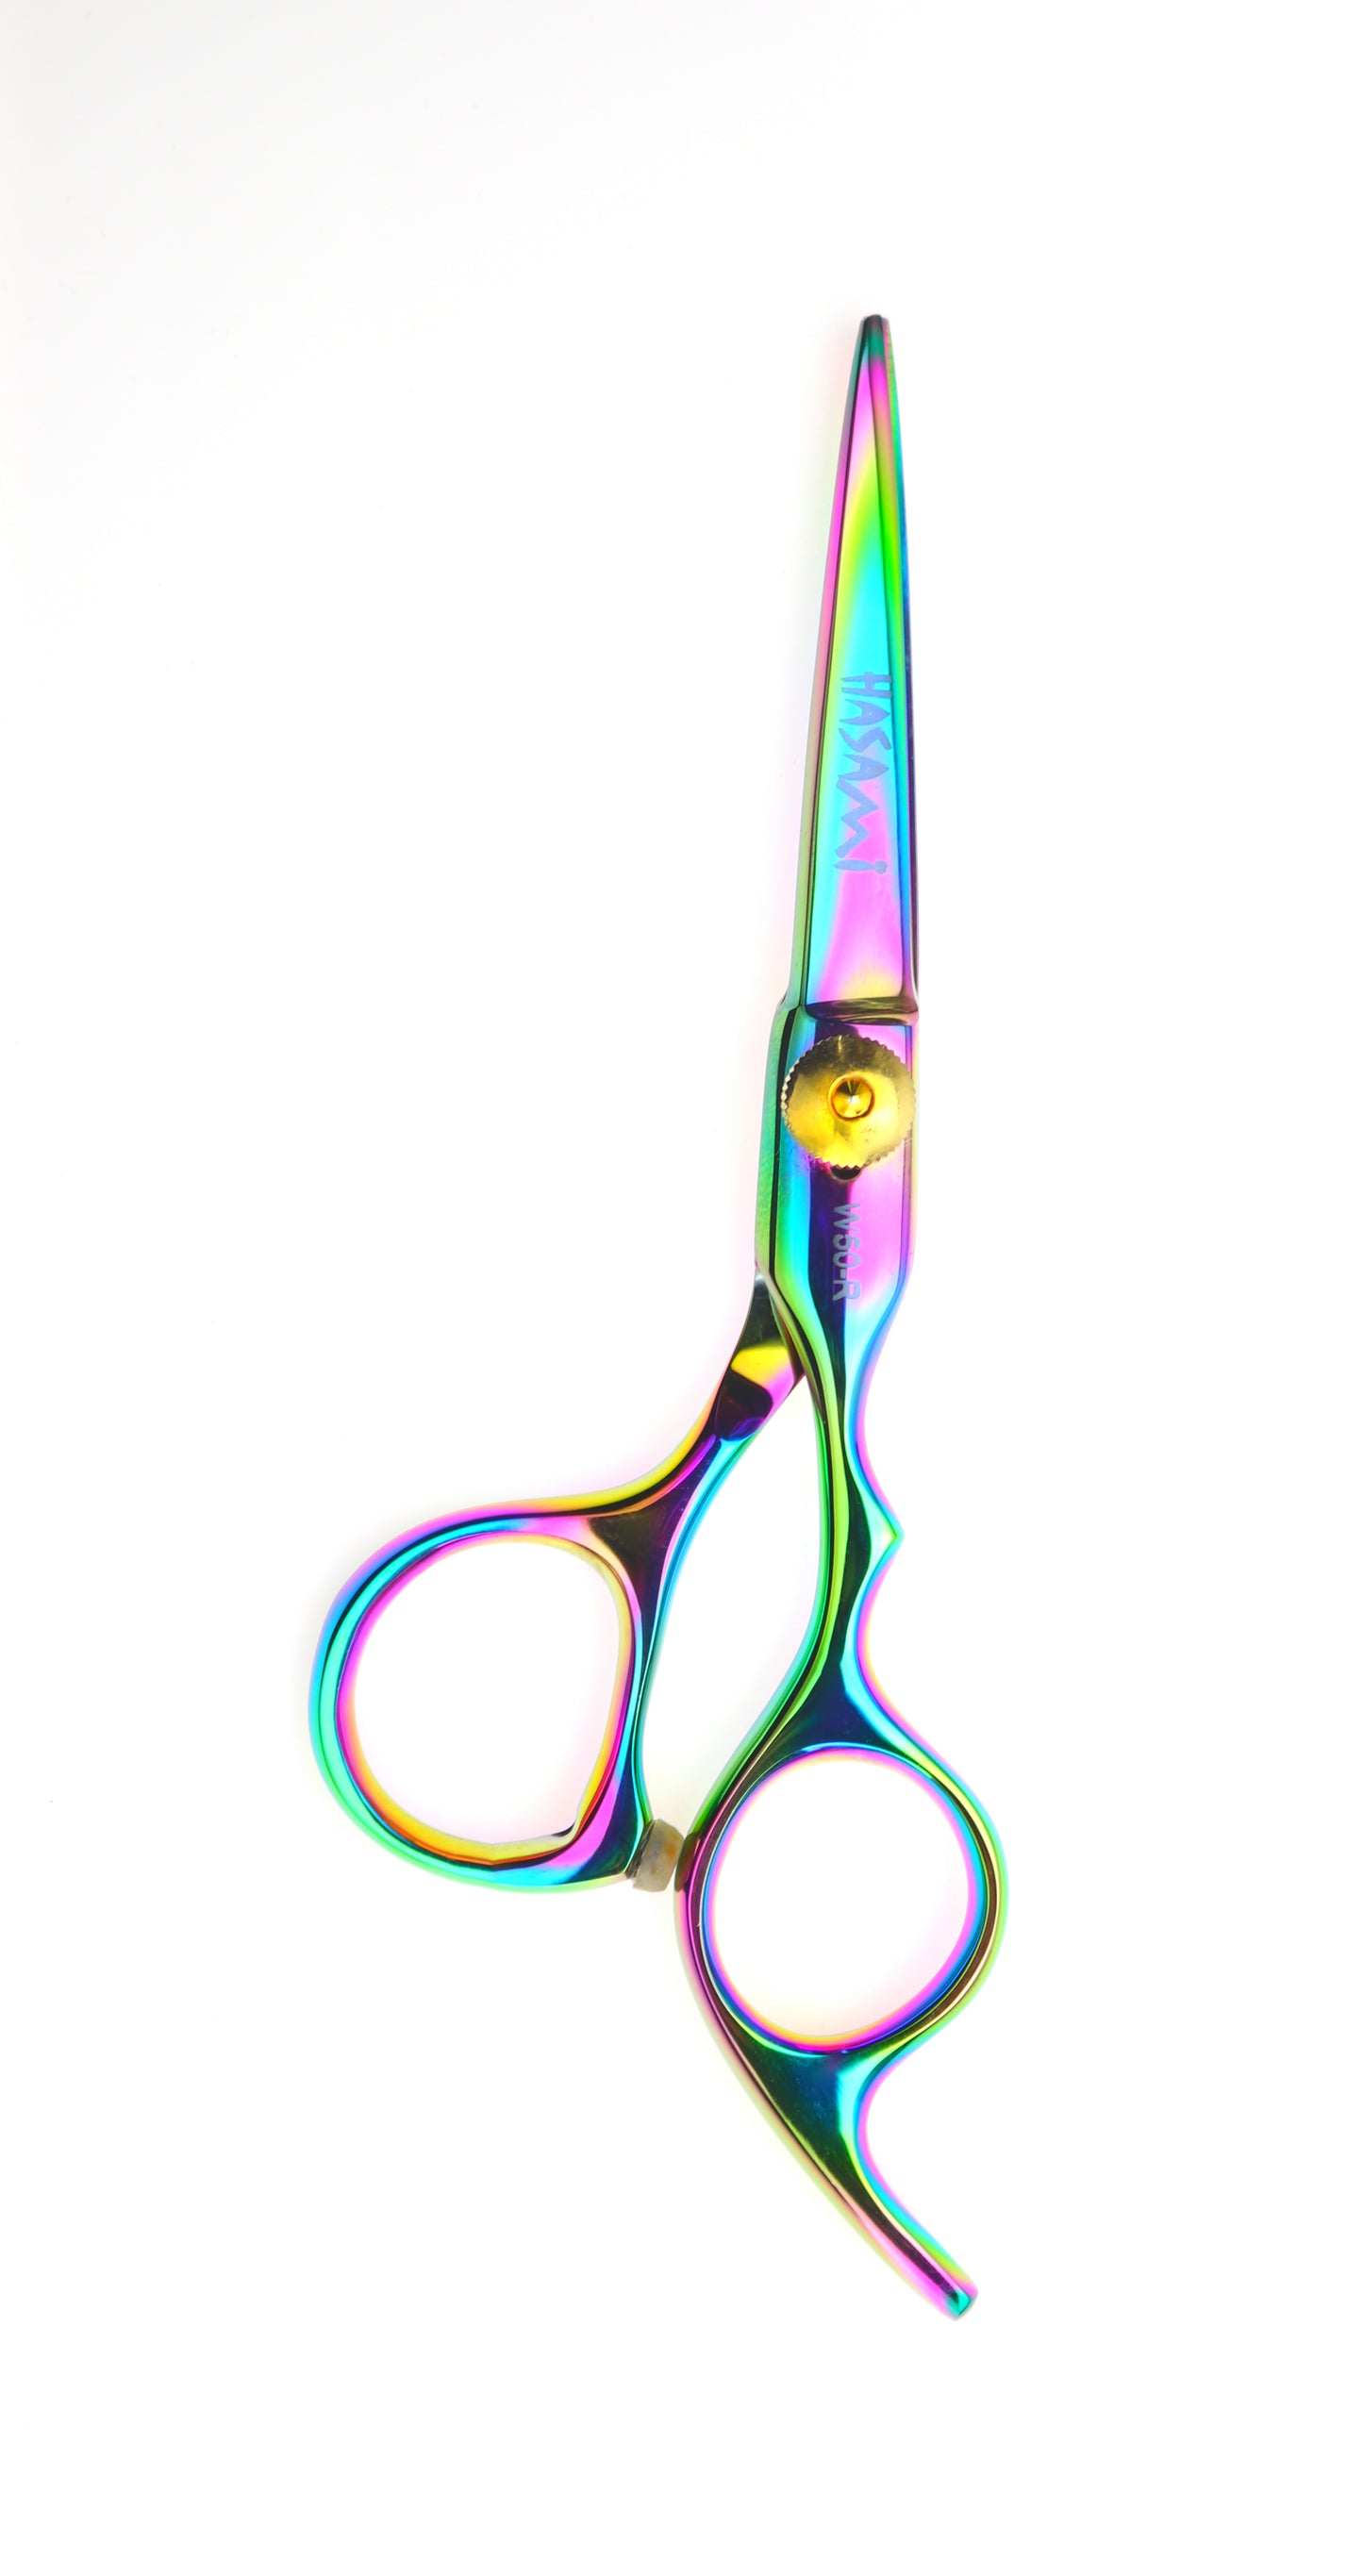 trimmers hair hairdressers shears Groomers  scissors hair and beauty shears hairdressing salon haircut hair and beard barbers hair groomer dog groomer  Japanese shear  japanese steel